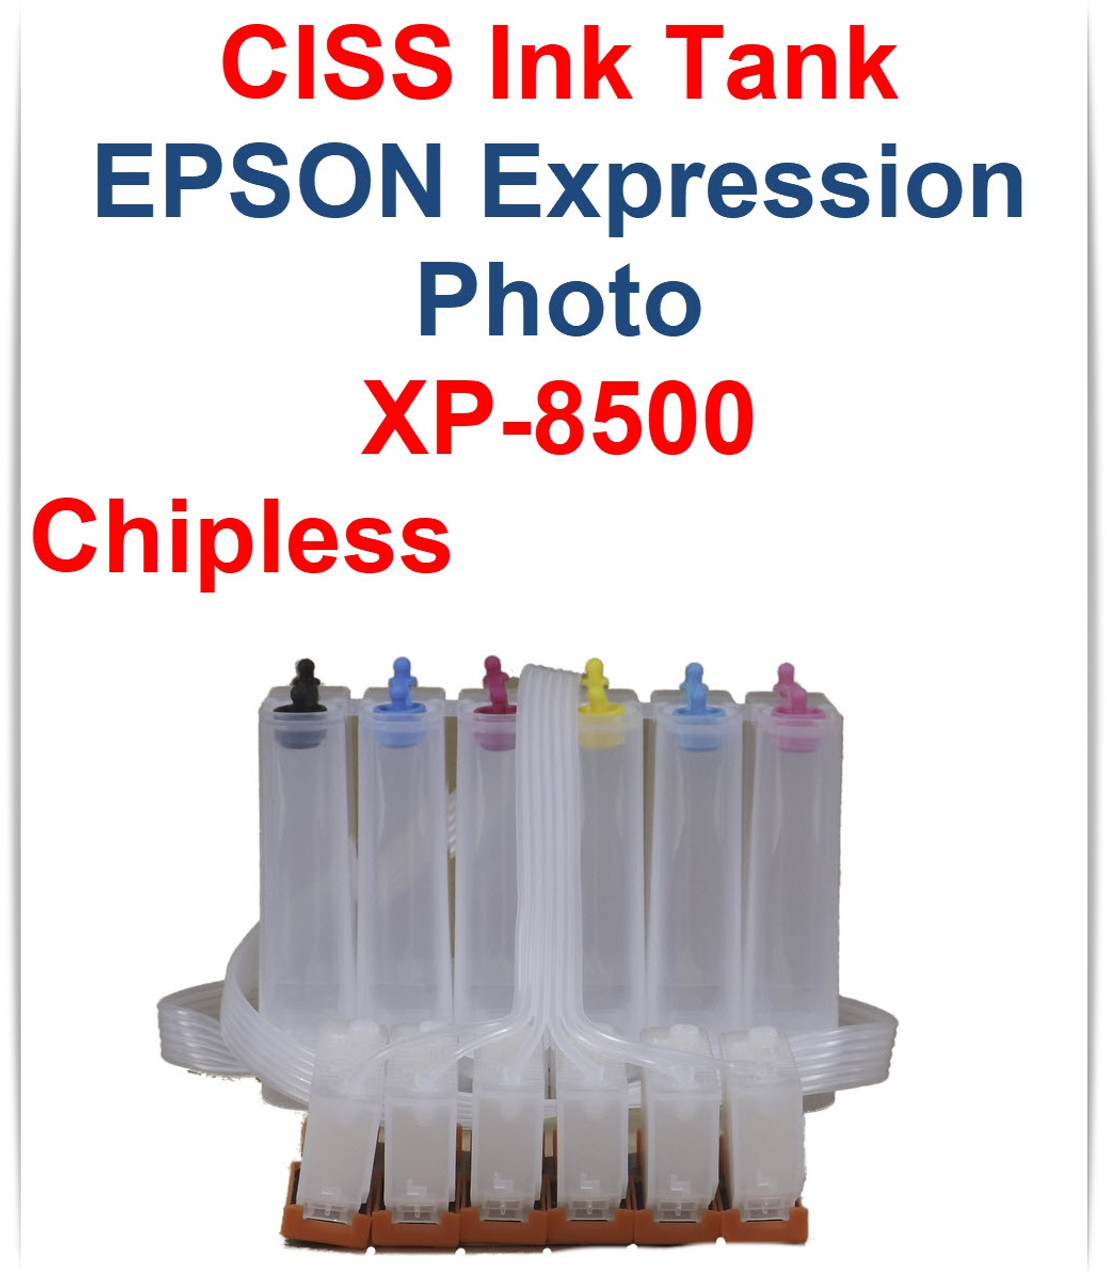 CISS Chipless Ink Tank for Epson Expression Premium XP-8500 Printer